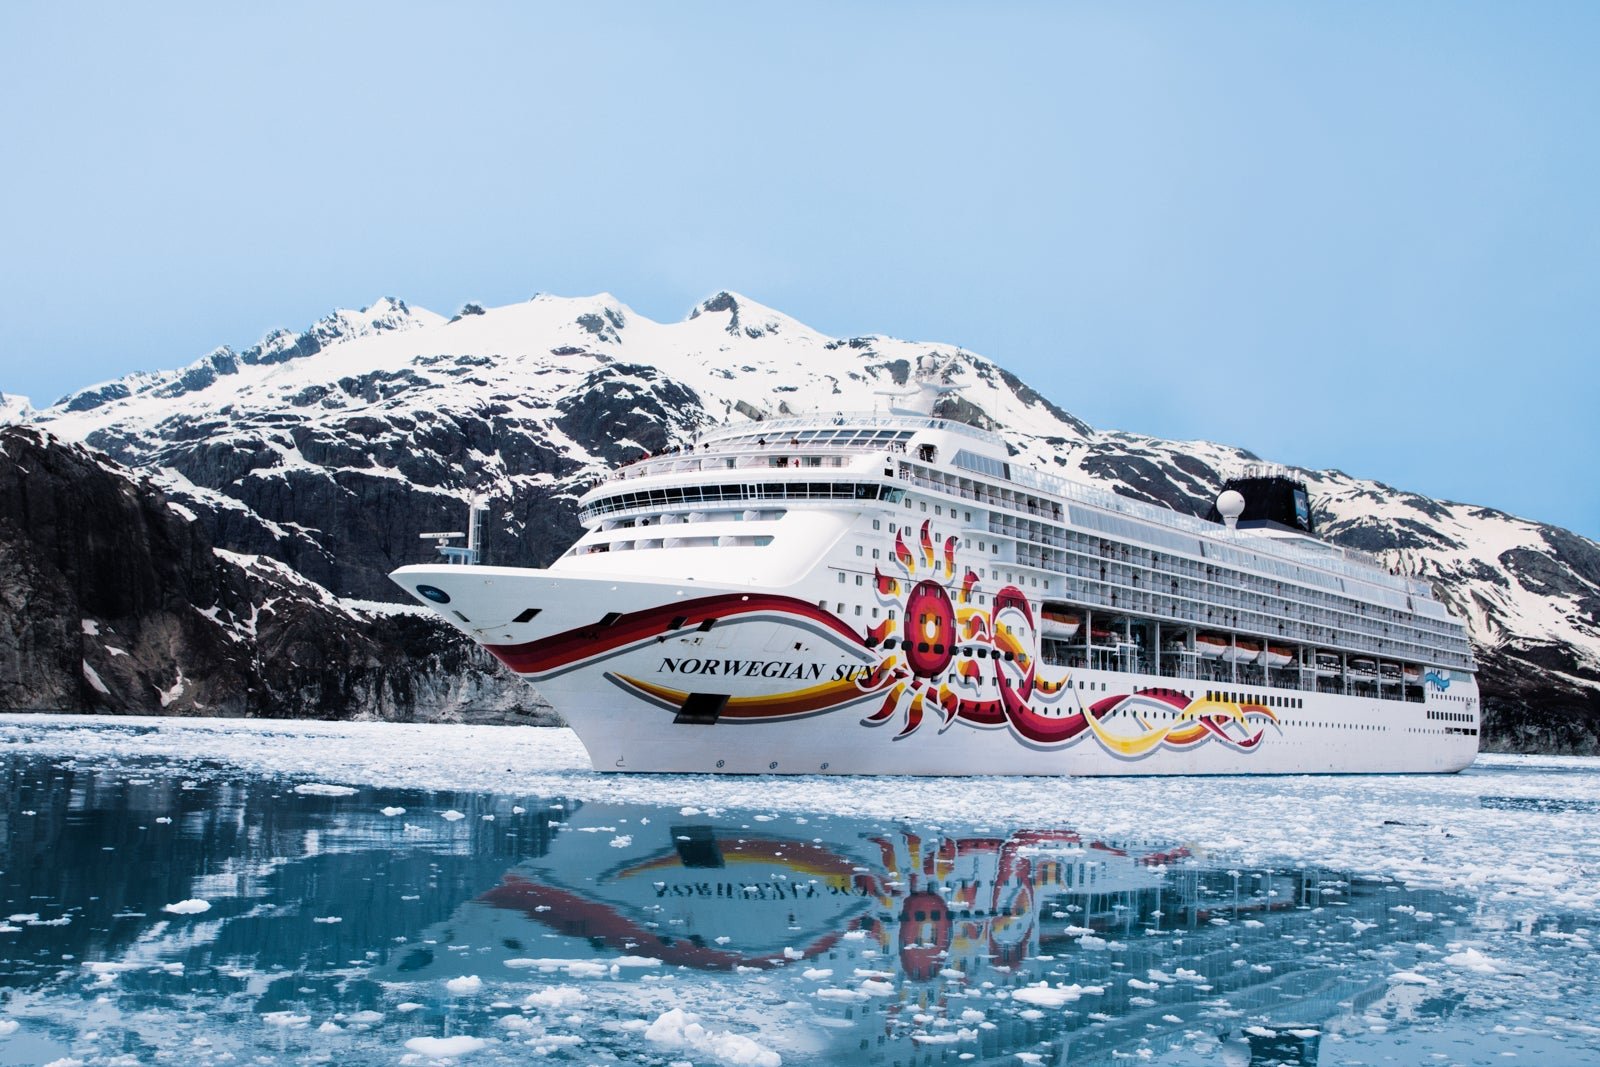 The trip will not go on: Ship hits iceberg in Alaska, derails cruise for thousands of travelers